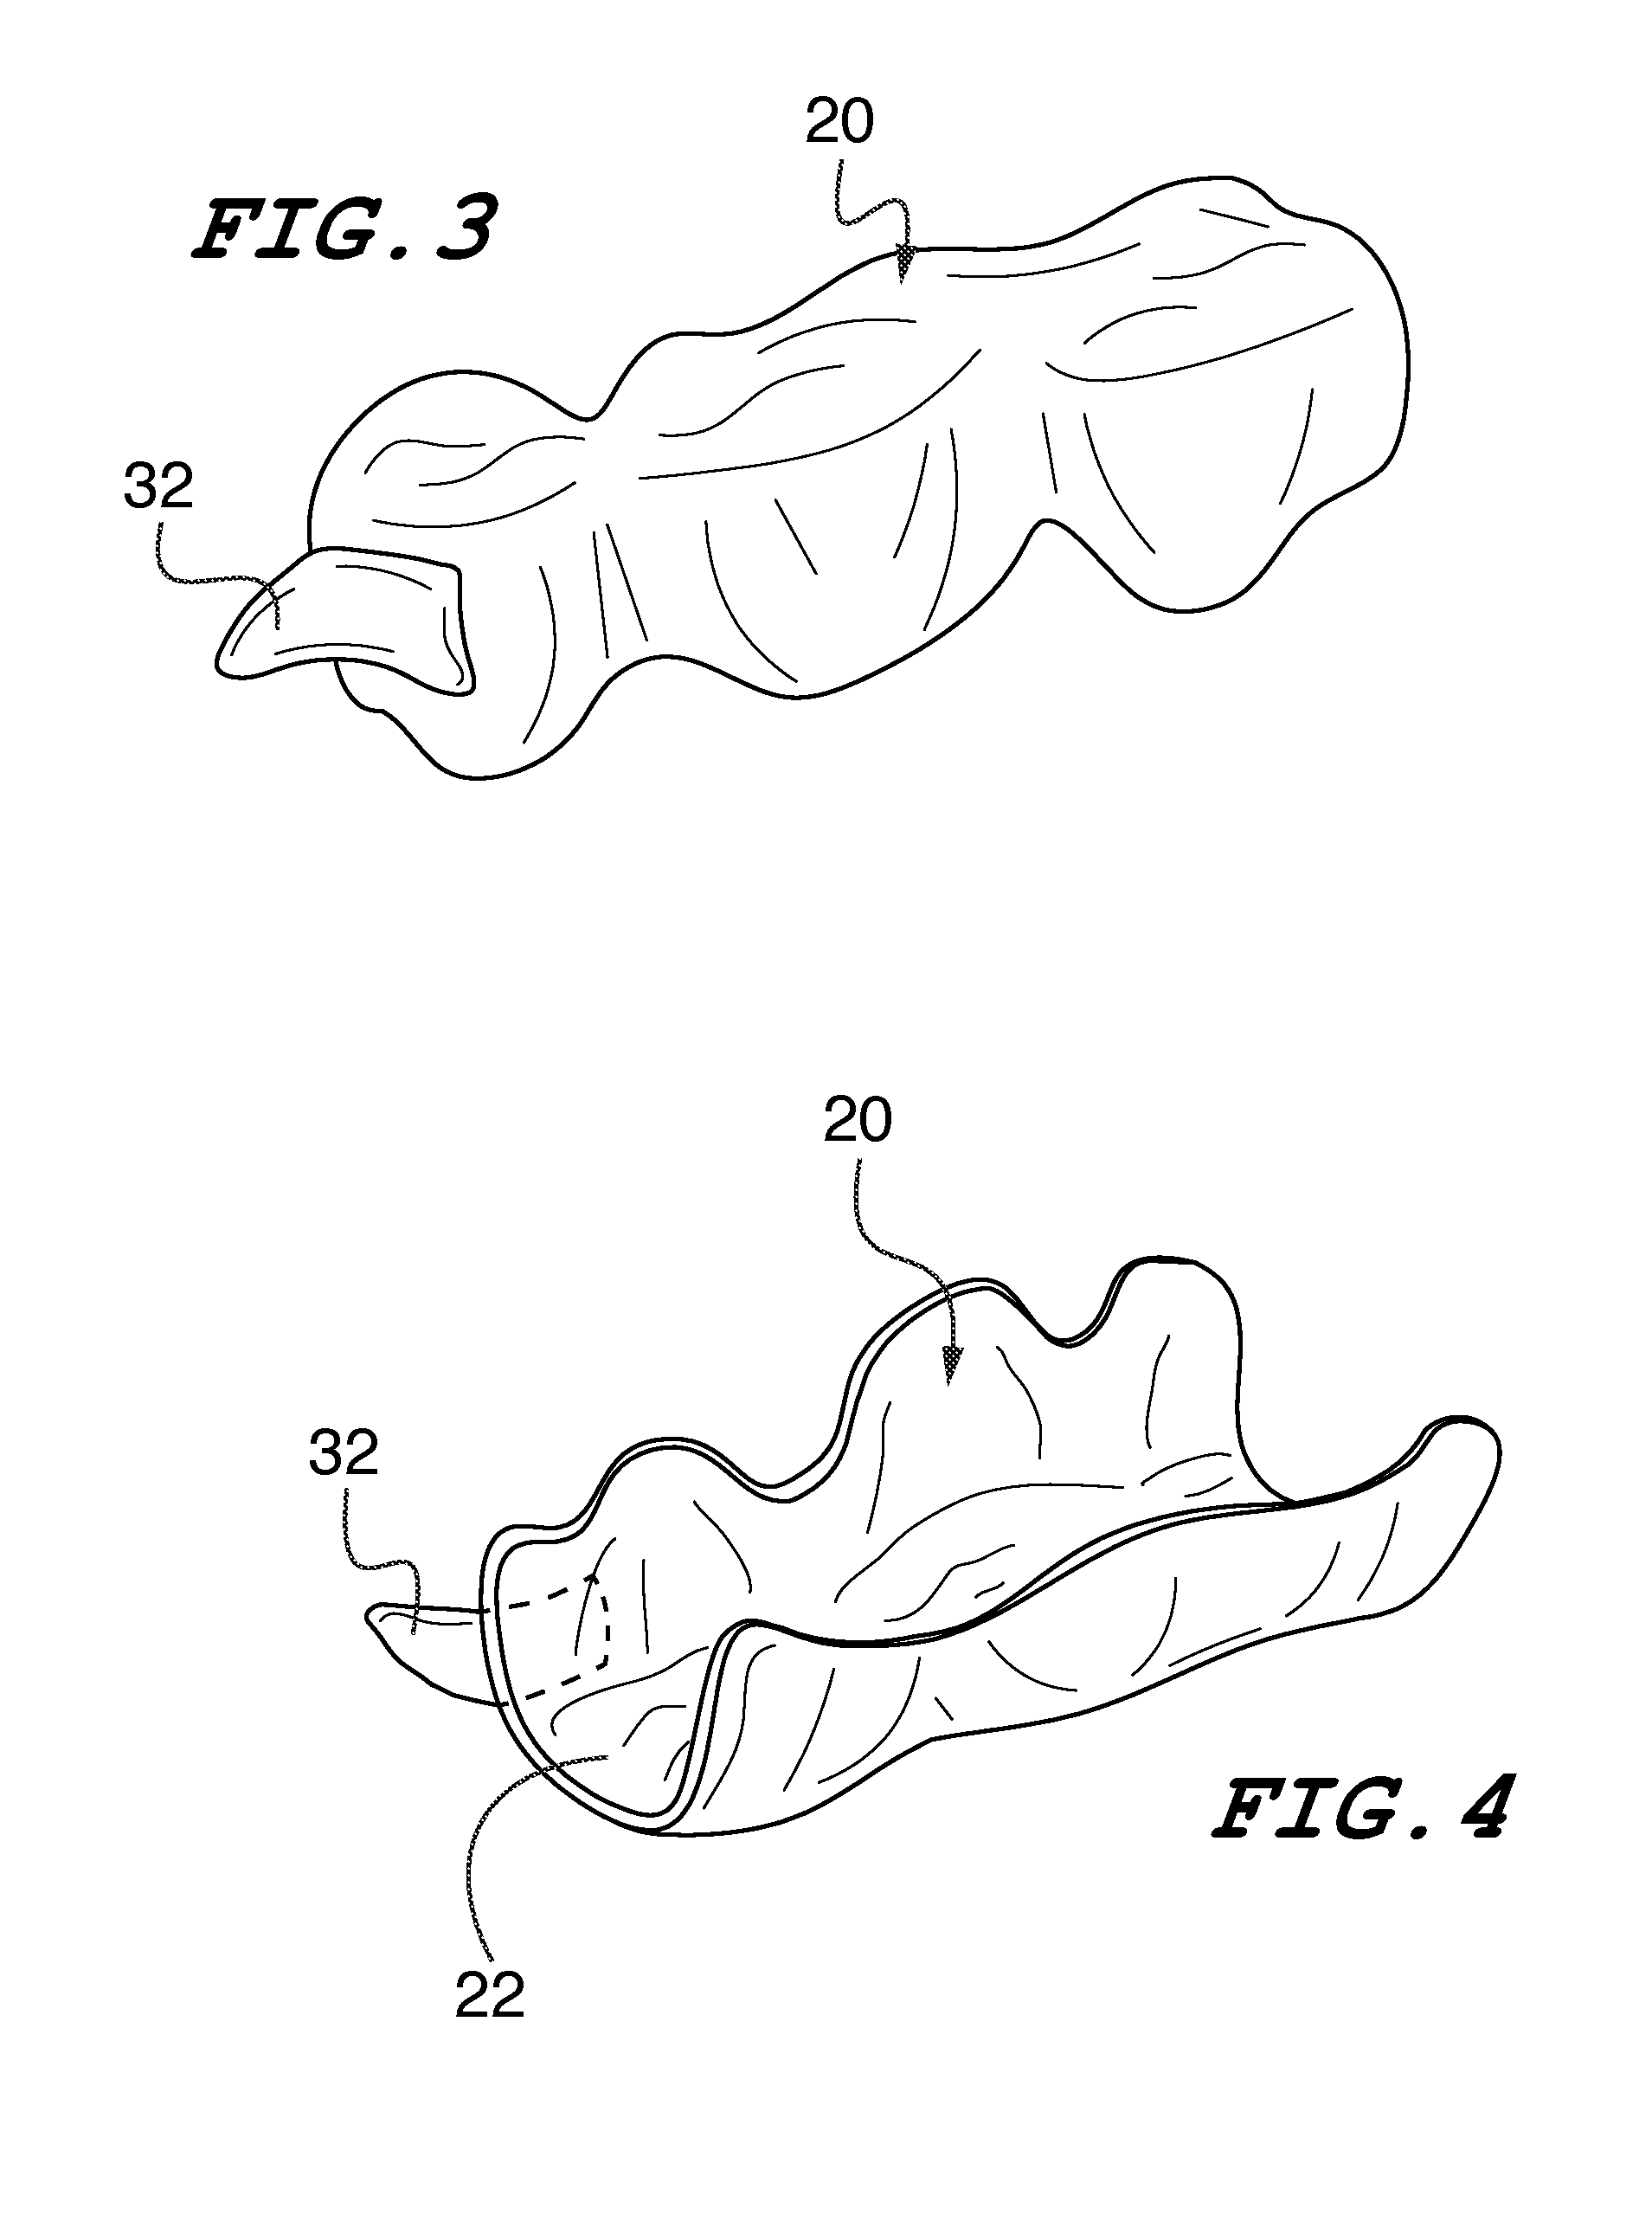 Orthodontic indirect bonding tray including stabilization features